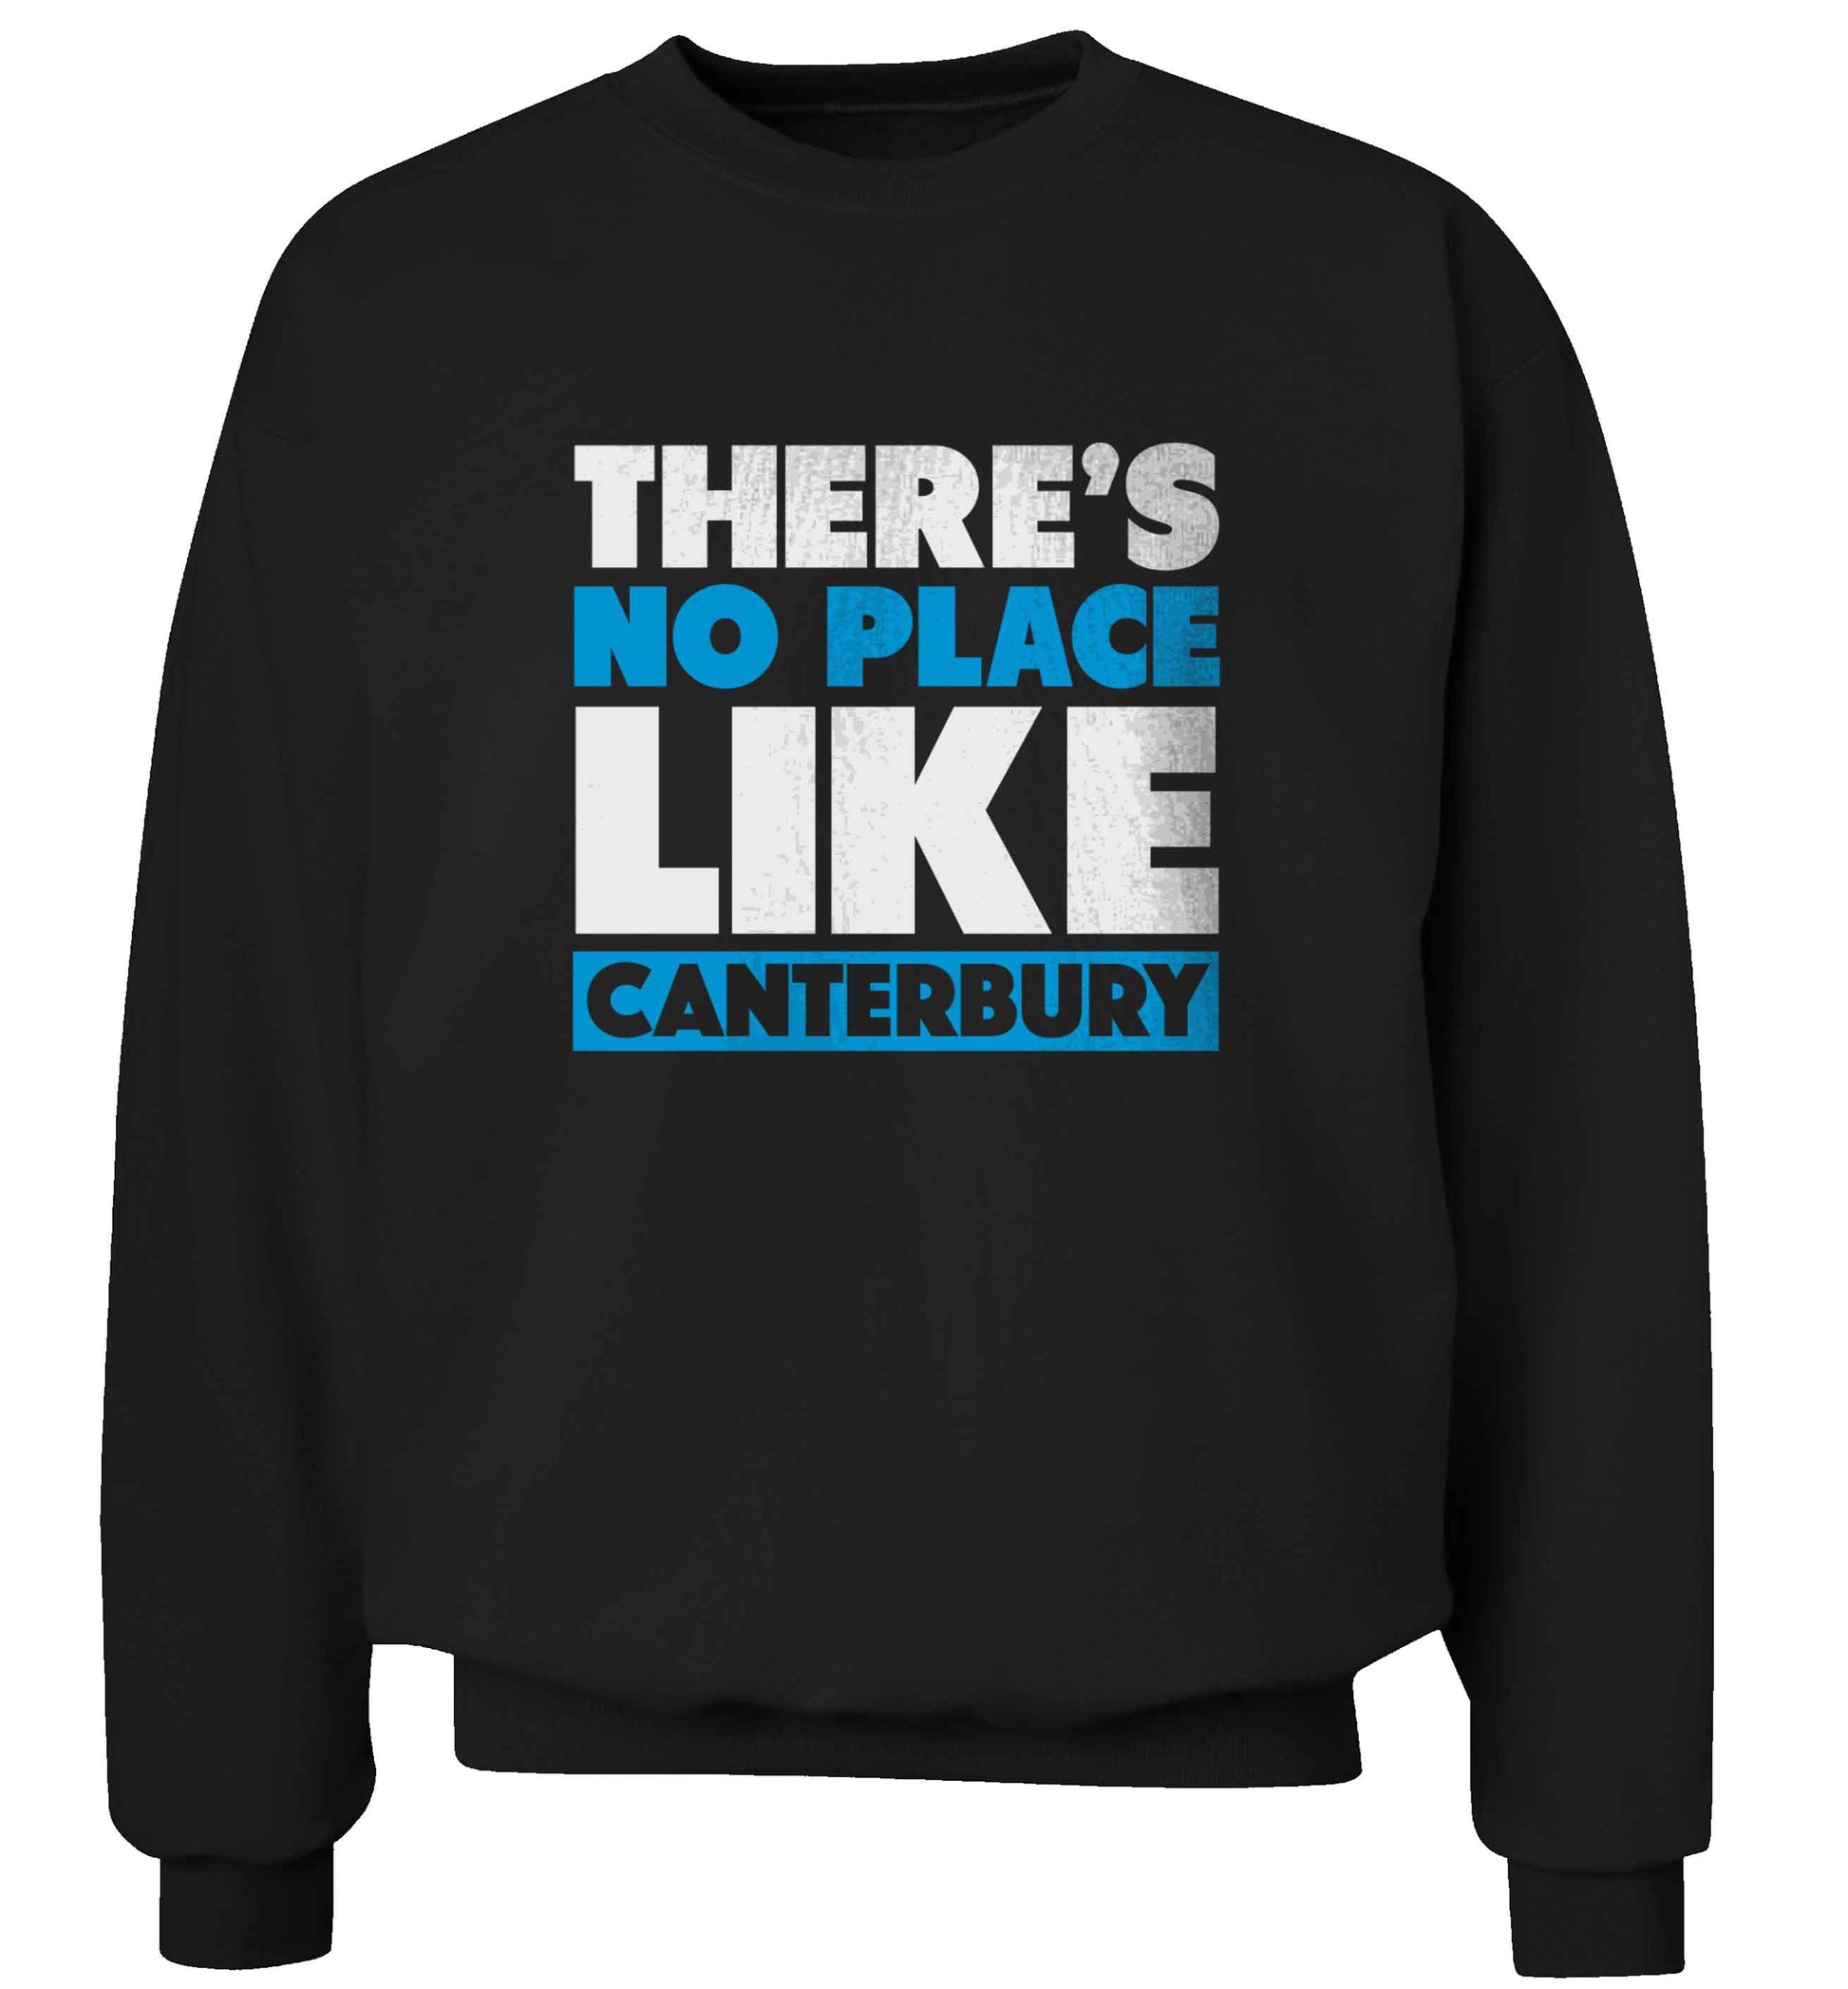 There's no place like Canterbury adult's unisex black sweater 2XL